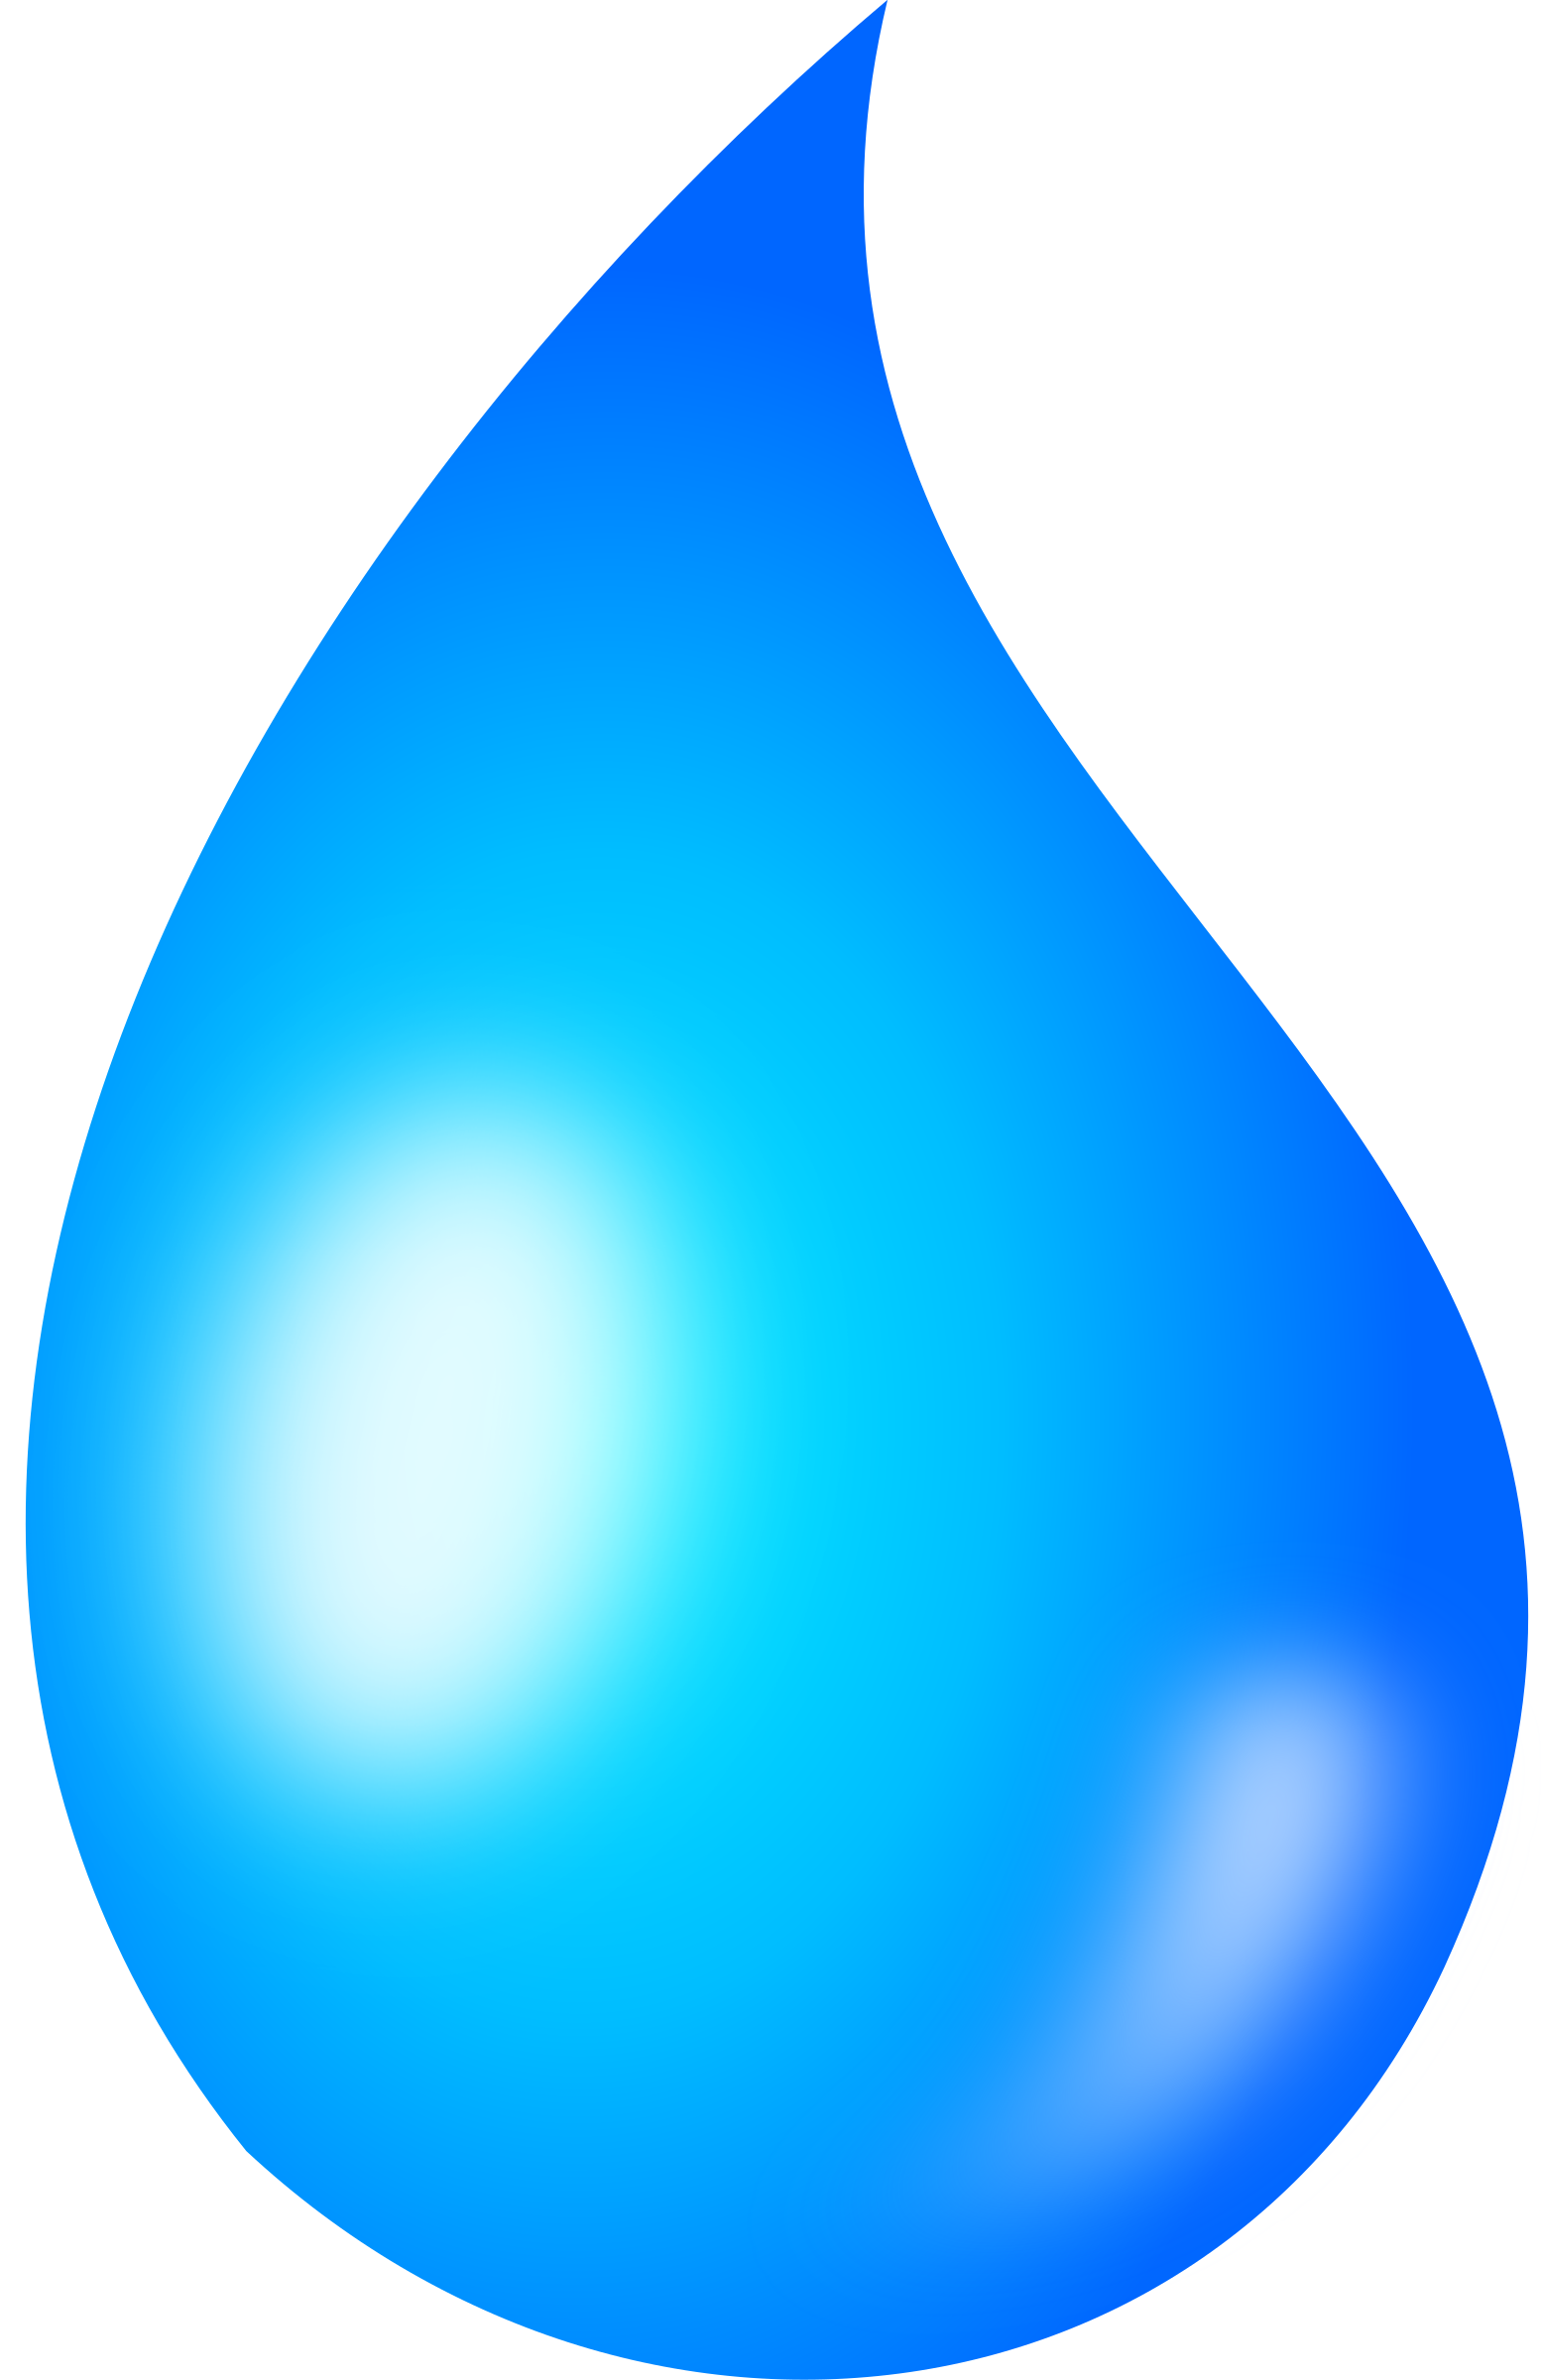 Water Droplet PNG HD Transparent Water Droplet HD.PNG Images.